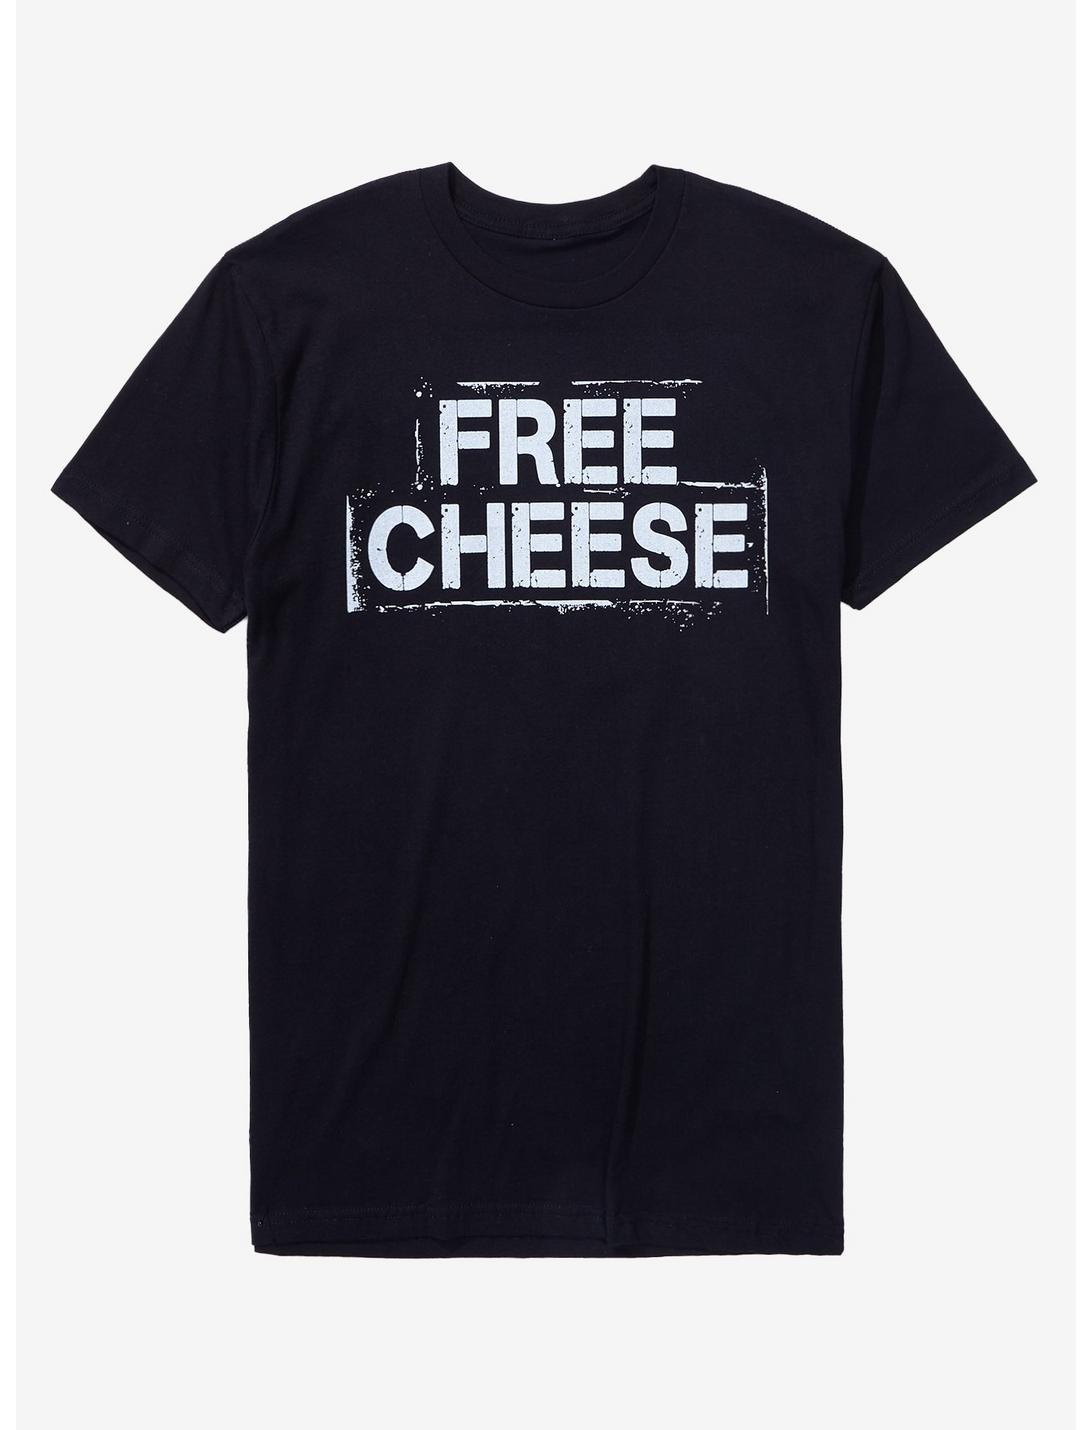 Reservation Dogs Free Cheese T-Shirt, BLACK, hi-res